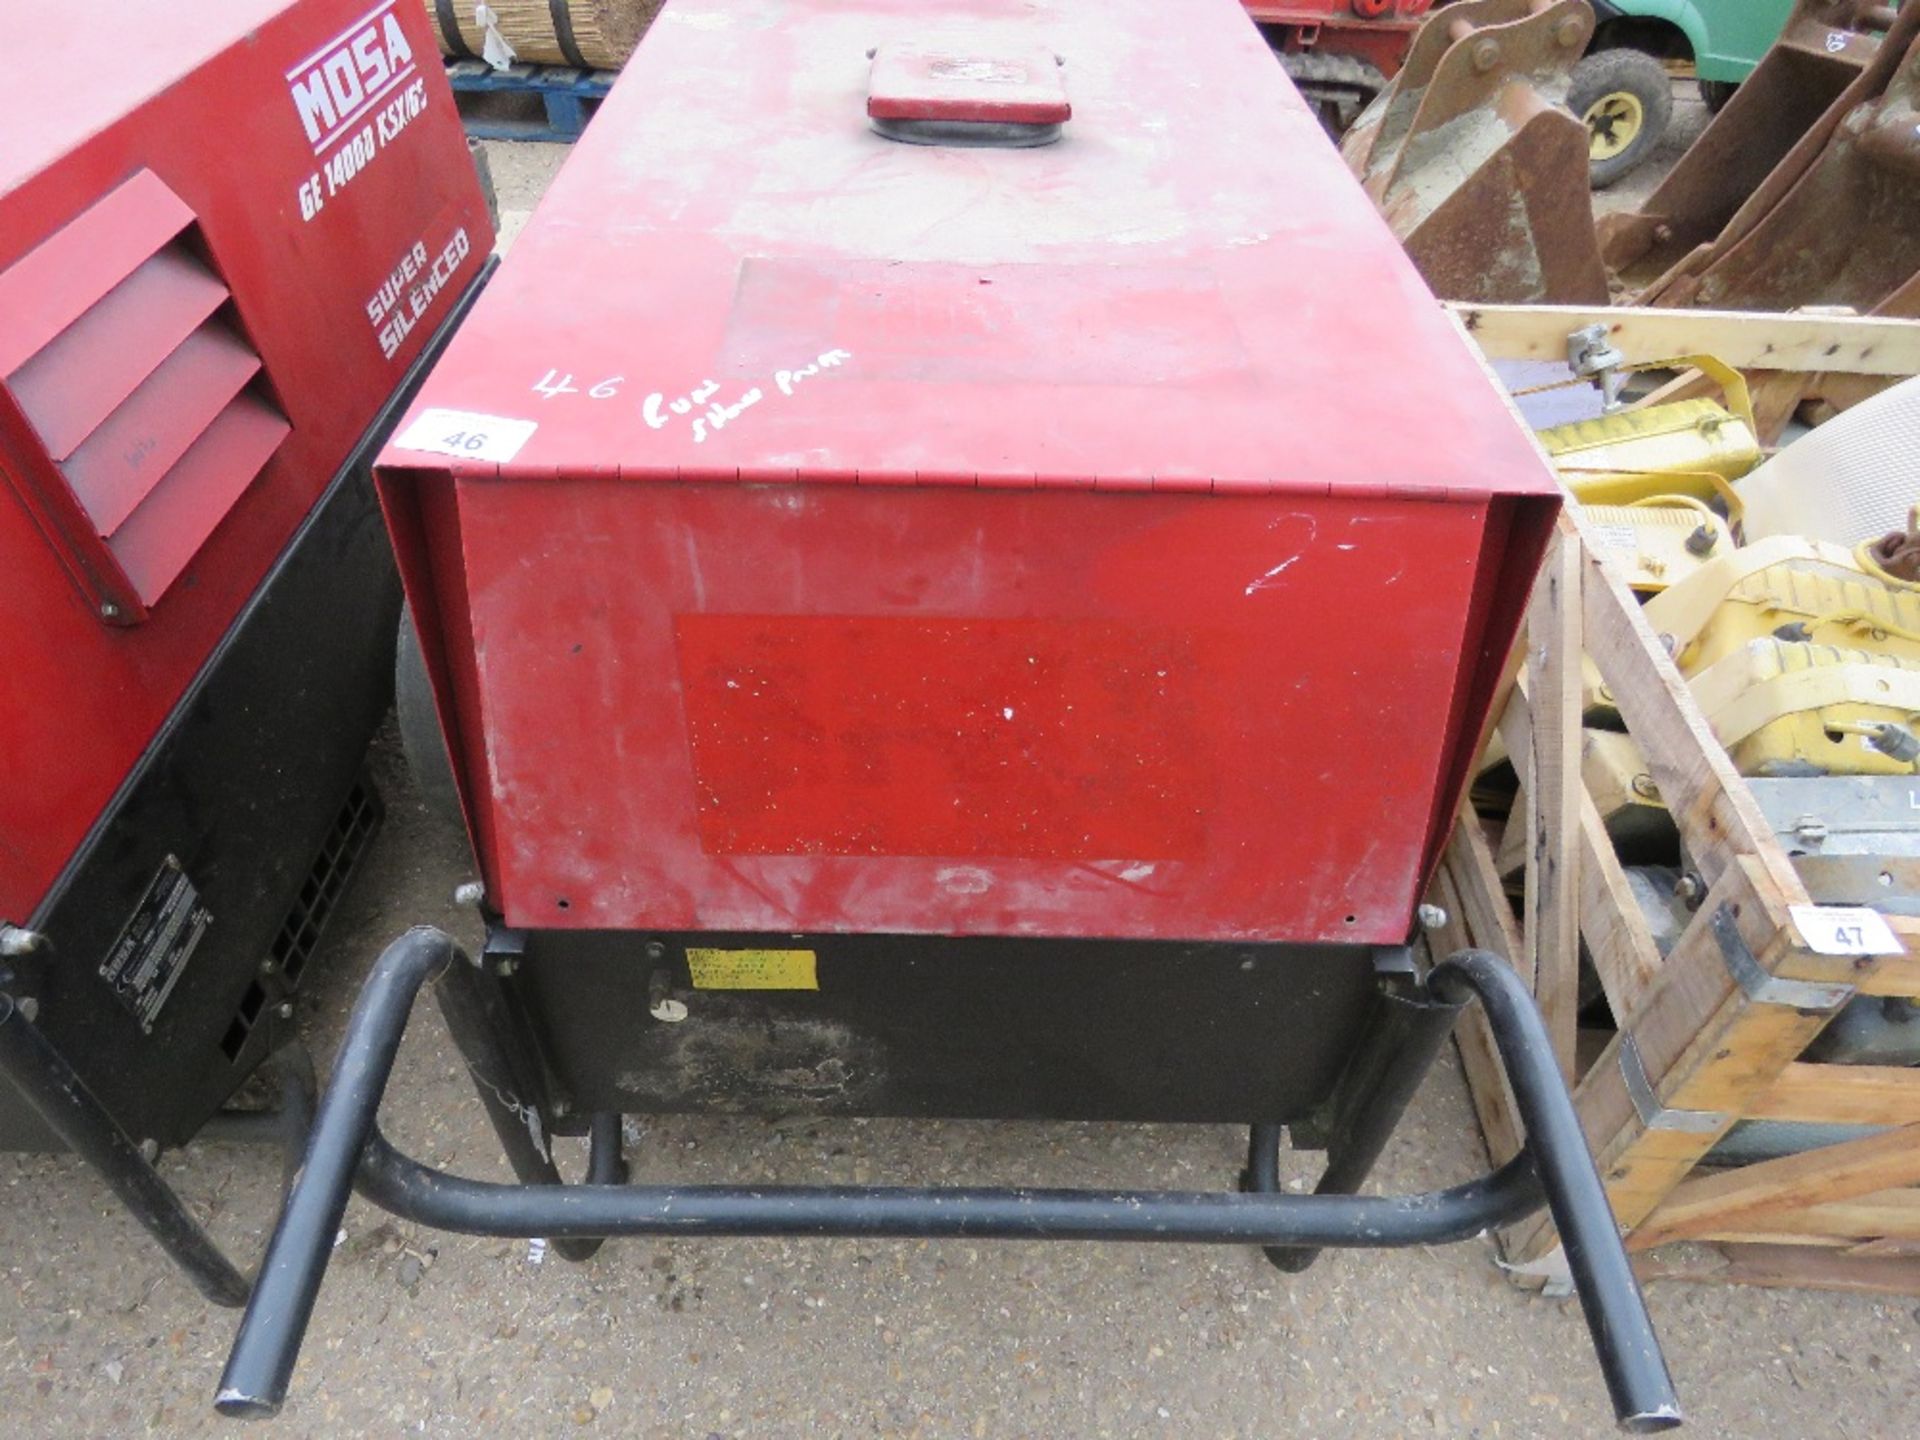 MOSA TS300SXC BARROW WELDER GENERATOR. WHEN TESTED WAS SEEN TO RUN AND SHOWED POWER ON THE GUAGE. - Image 2 of 5